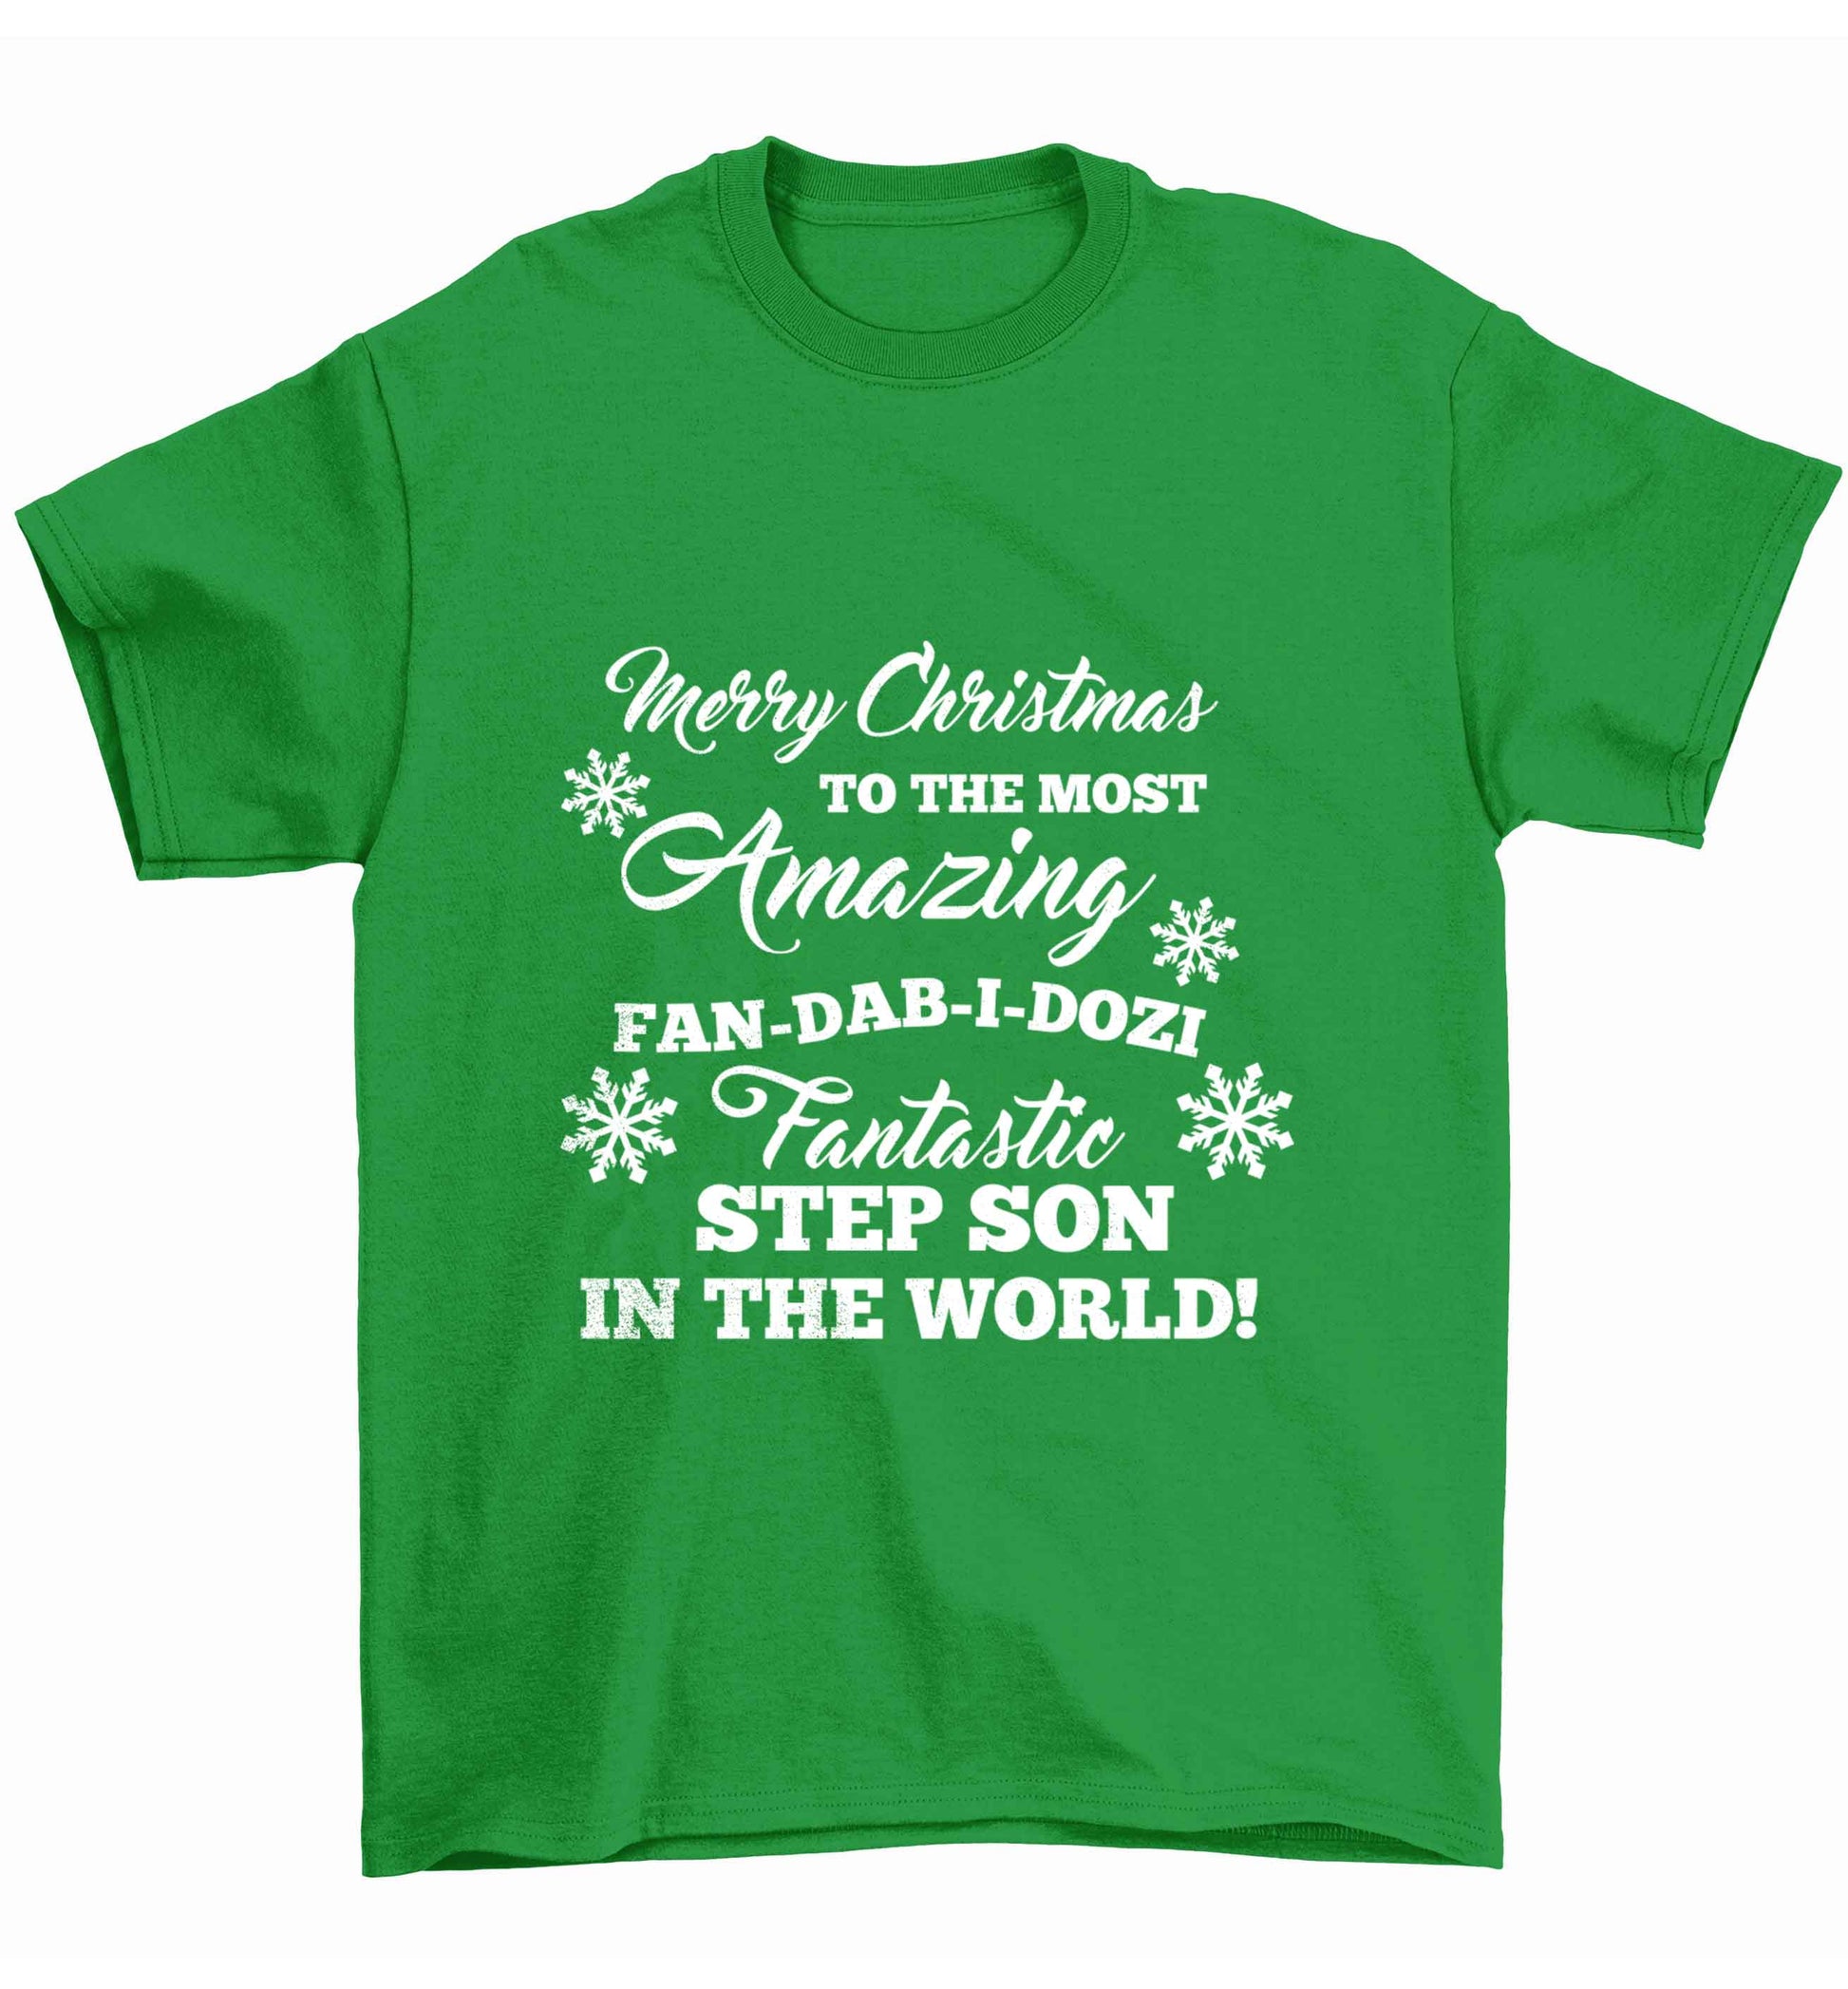 Merry Christmas to the most amazing fan-dab-i-dozi fantasic Step Son in the world Children's green Tshirt 12-13 Years